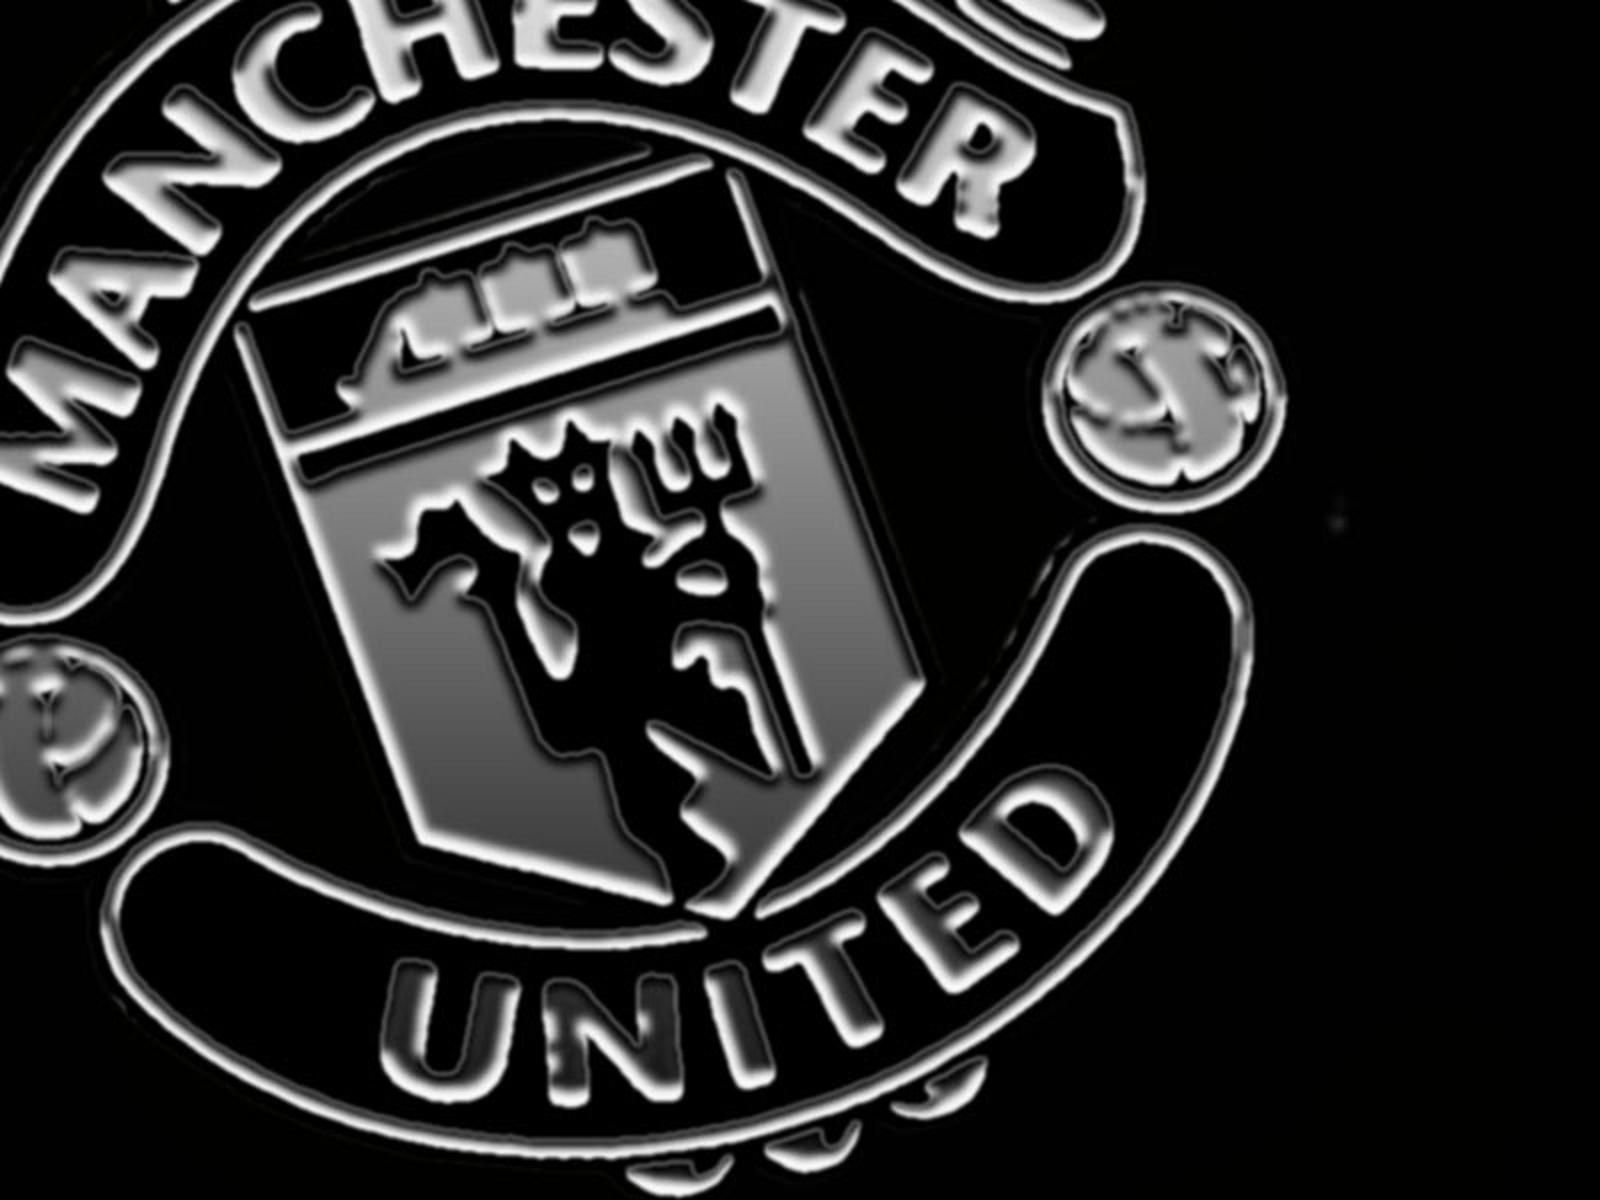 Manchester United logo Cool Sport Backgrounds